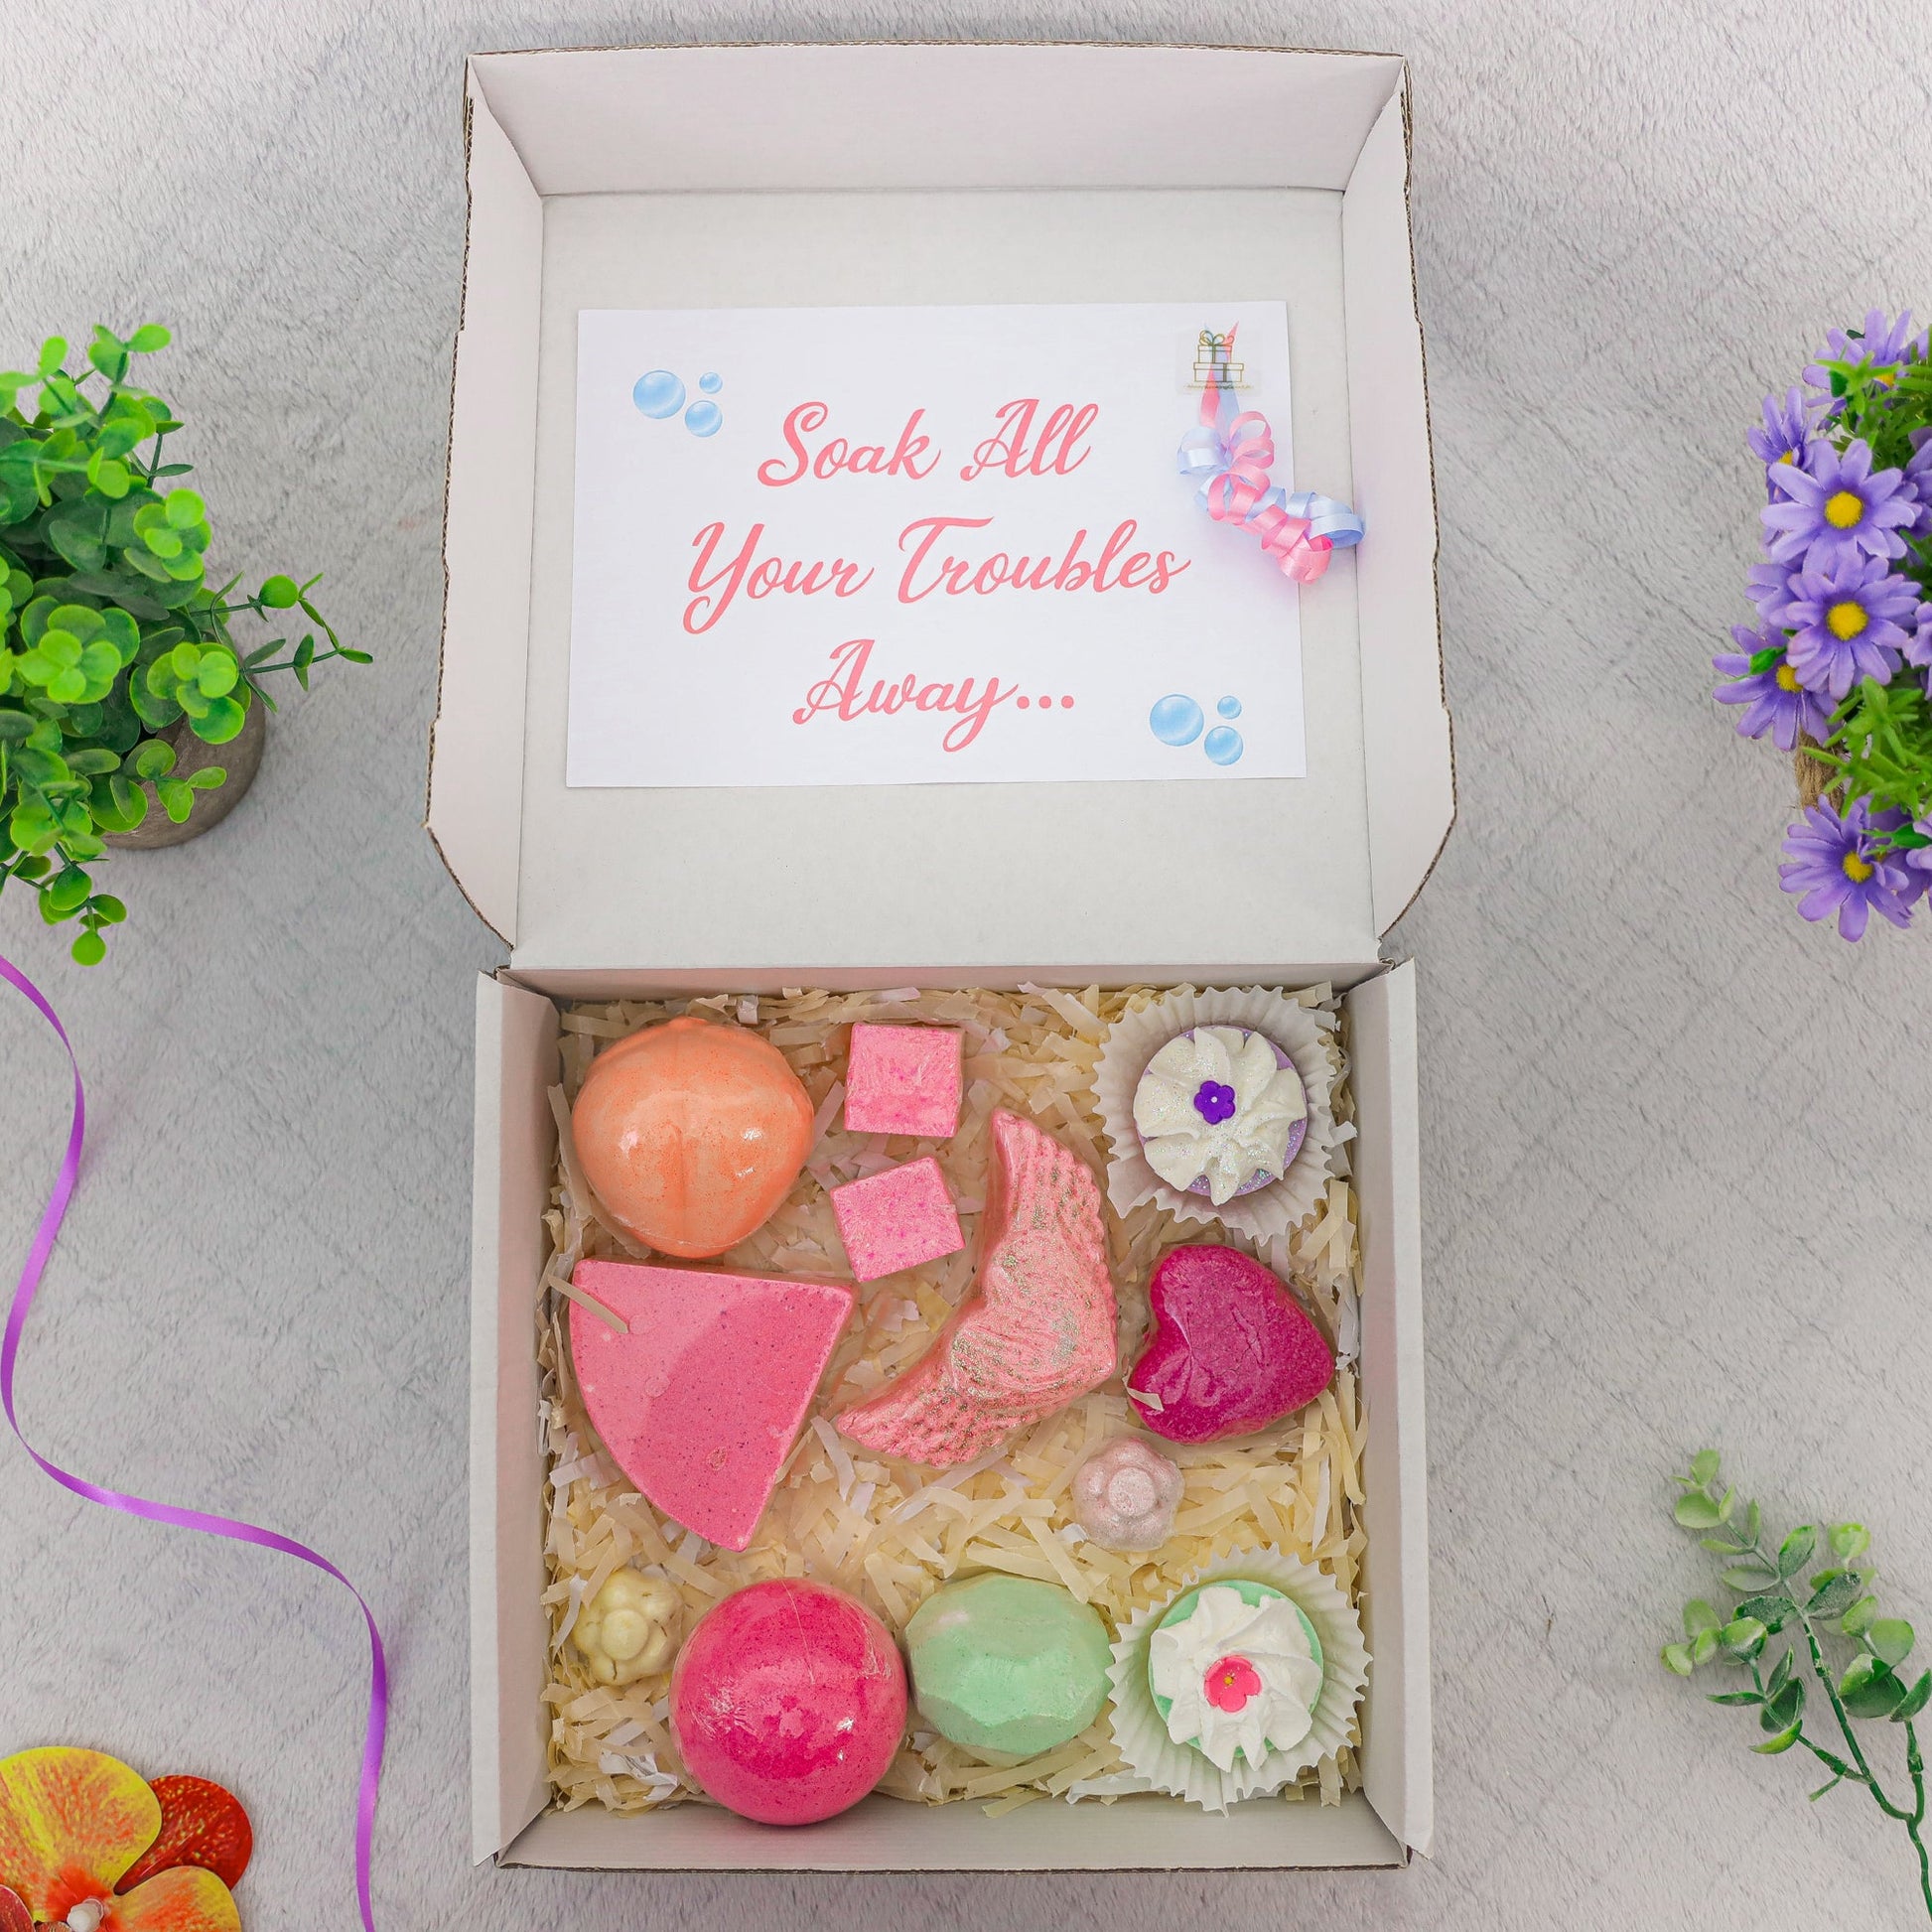 Happy Birthday Large Bath Bomb Pamper Relax Gift Box  - Always Looking Good -   